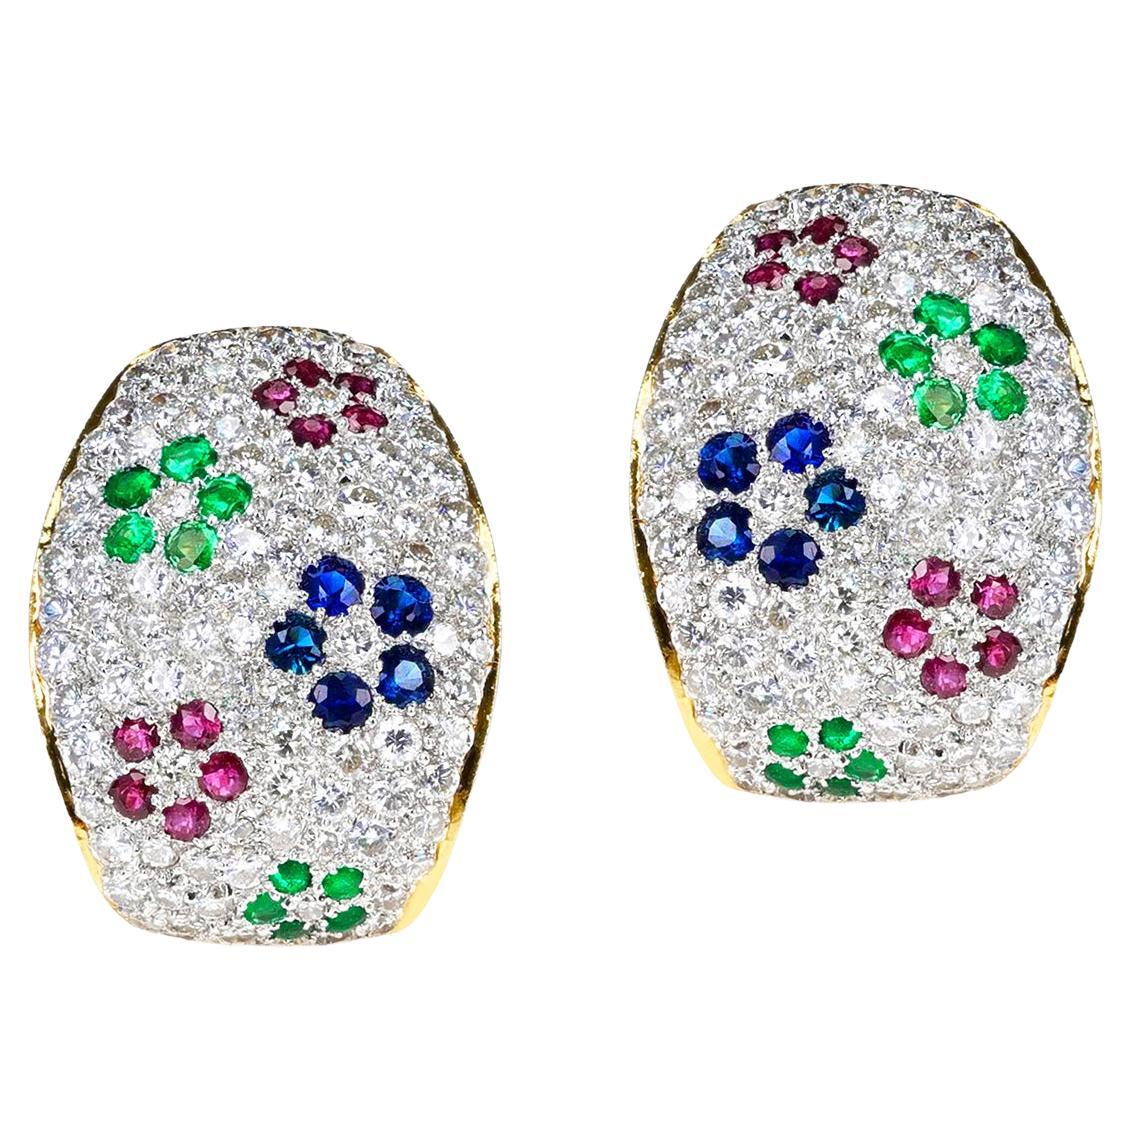 Diamond, Emerald, Ruby and Sapphire Floral Design Earrings, 18k